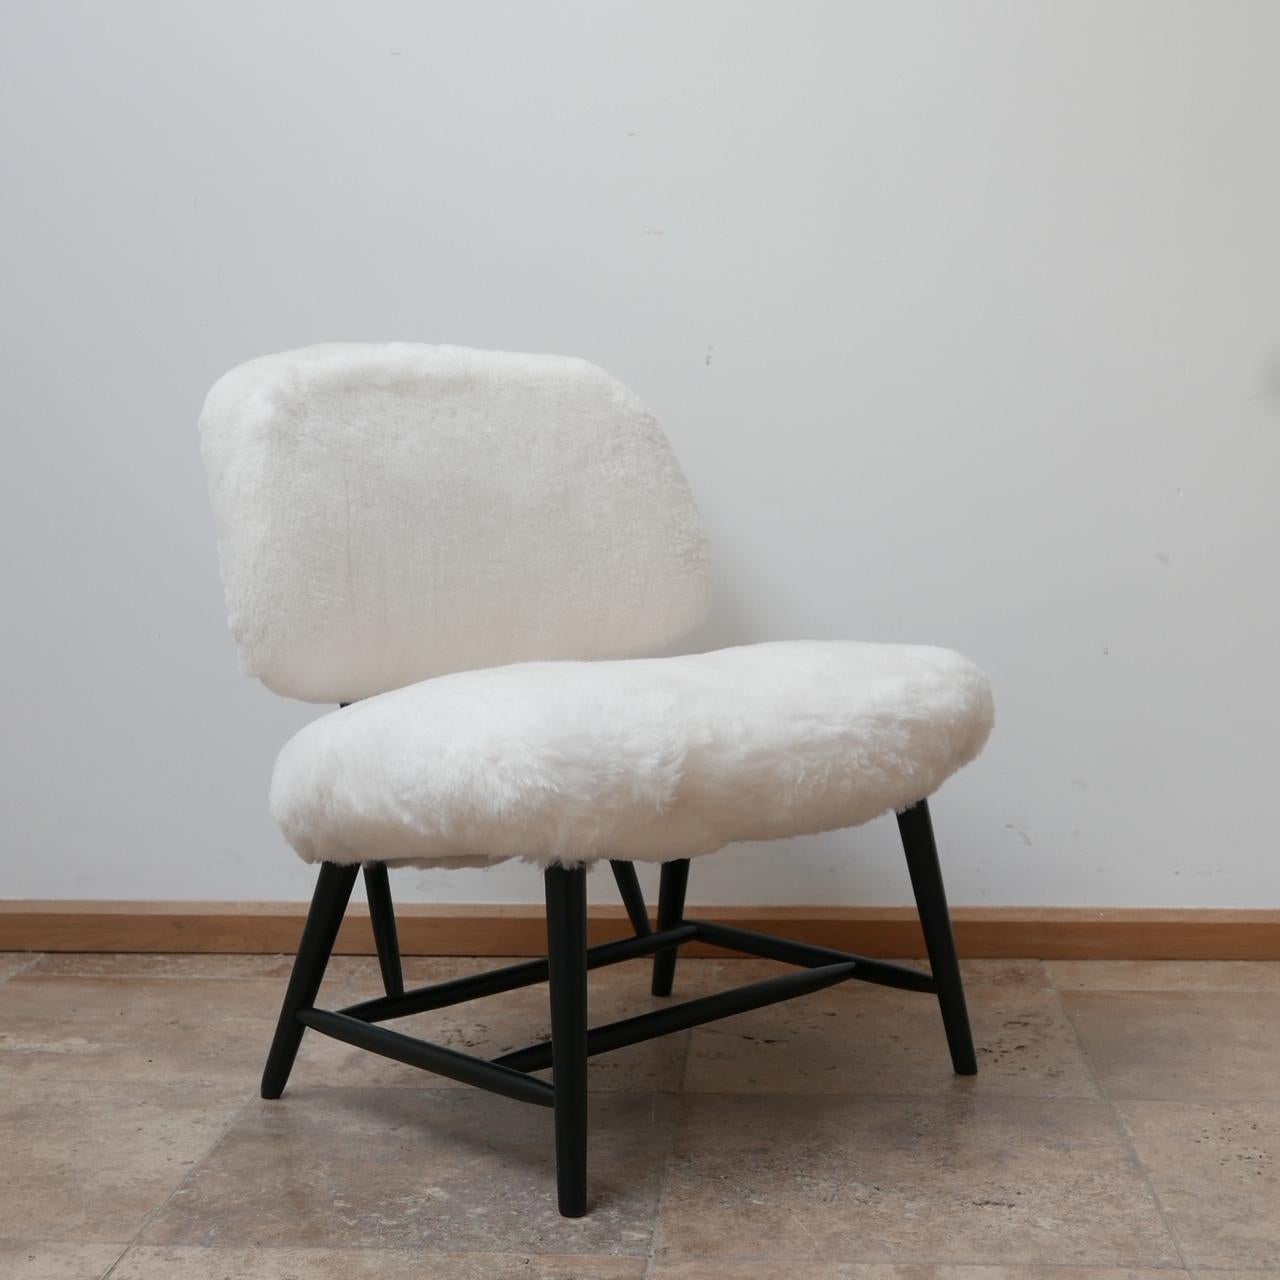 Pair of Alf Svensson 'TeVe' Sheepskin Shearling Lounge Chairs For Sale 2